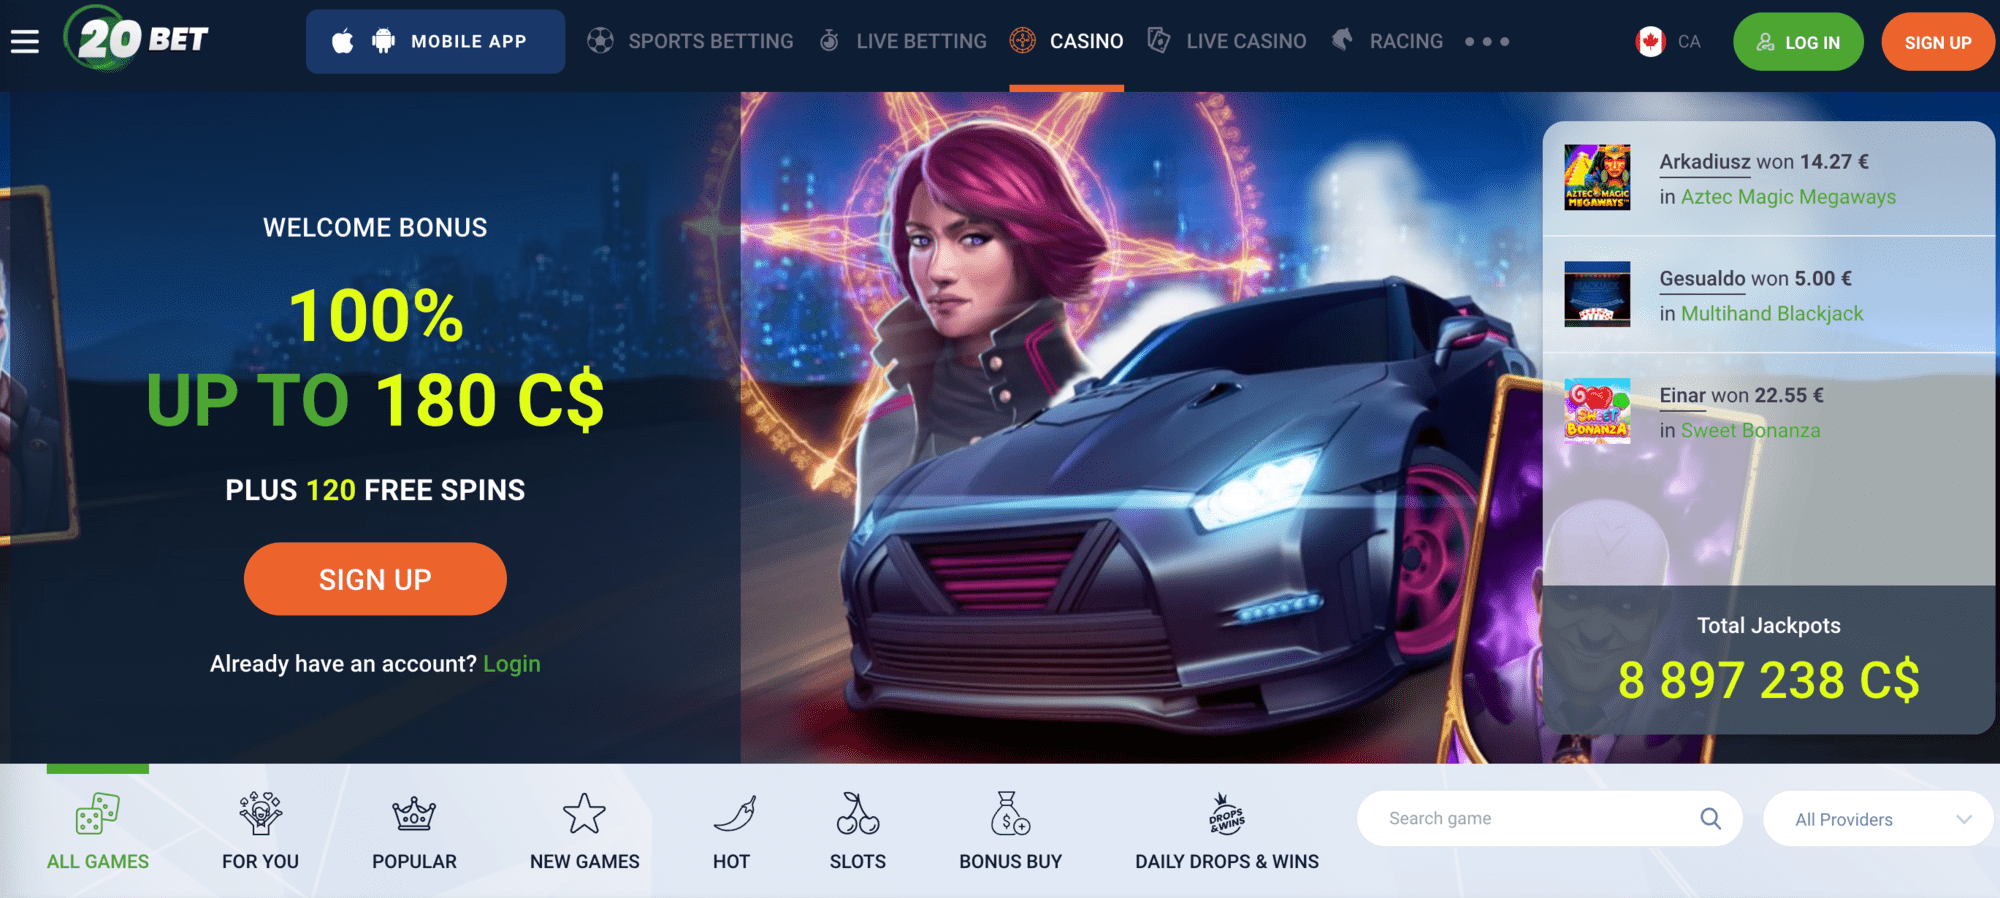 20bet homepage of the website